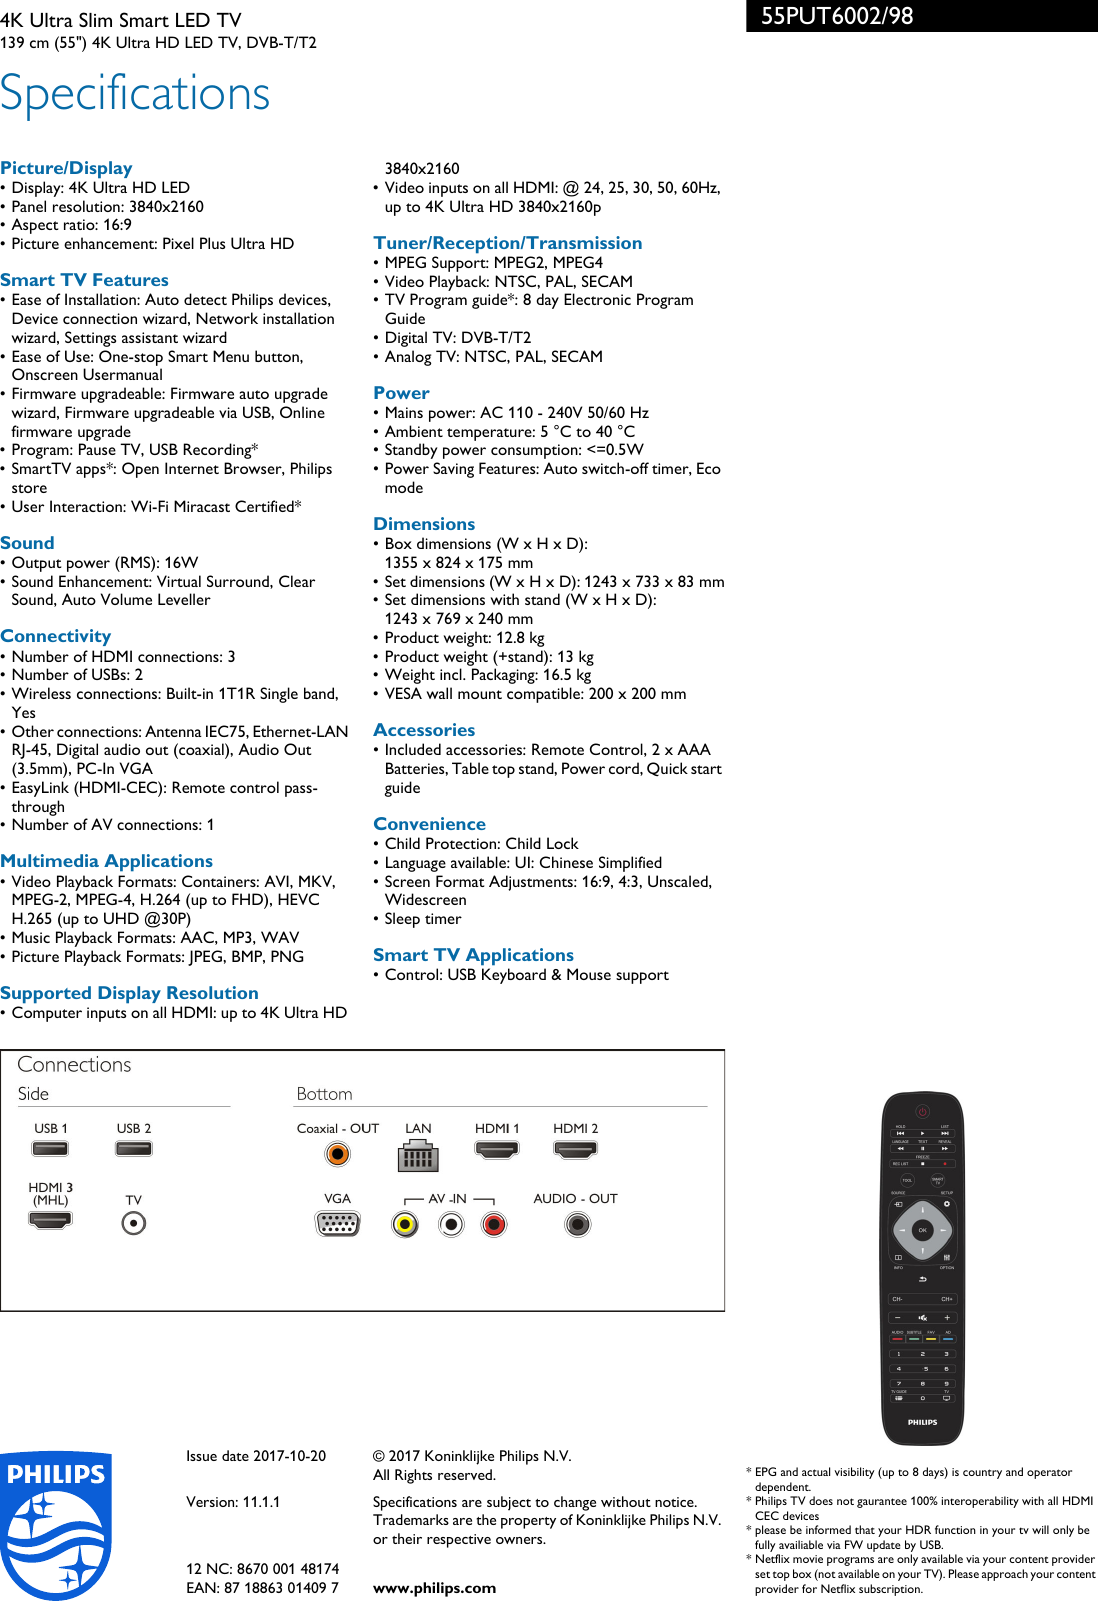 Page 3 of 3 - Philips 55PUT6002/98 4K Ultra Slim Smart LED TV With Pixel Plus HD User Manual Leaflet 55put6002 98 Pss Engsg